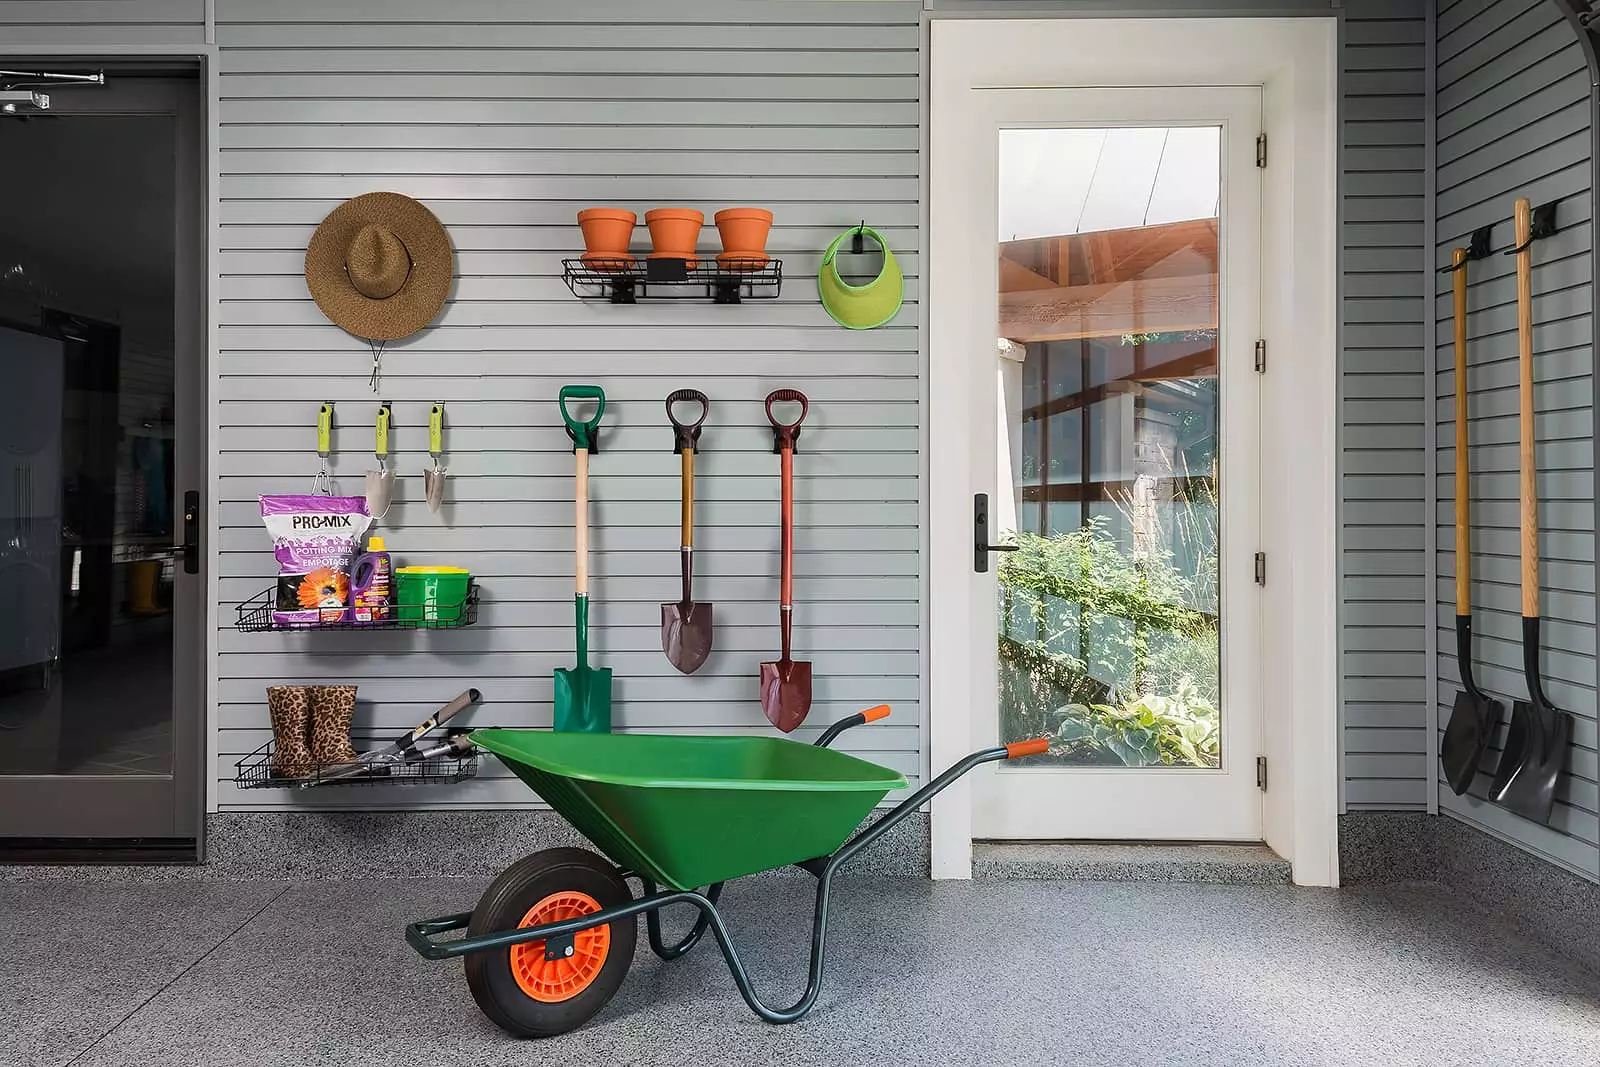 Slatwall storage helps to keep the gardening tools and supplies, organized and easy to find.